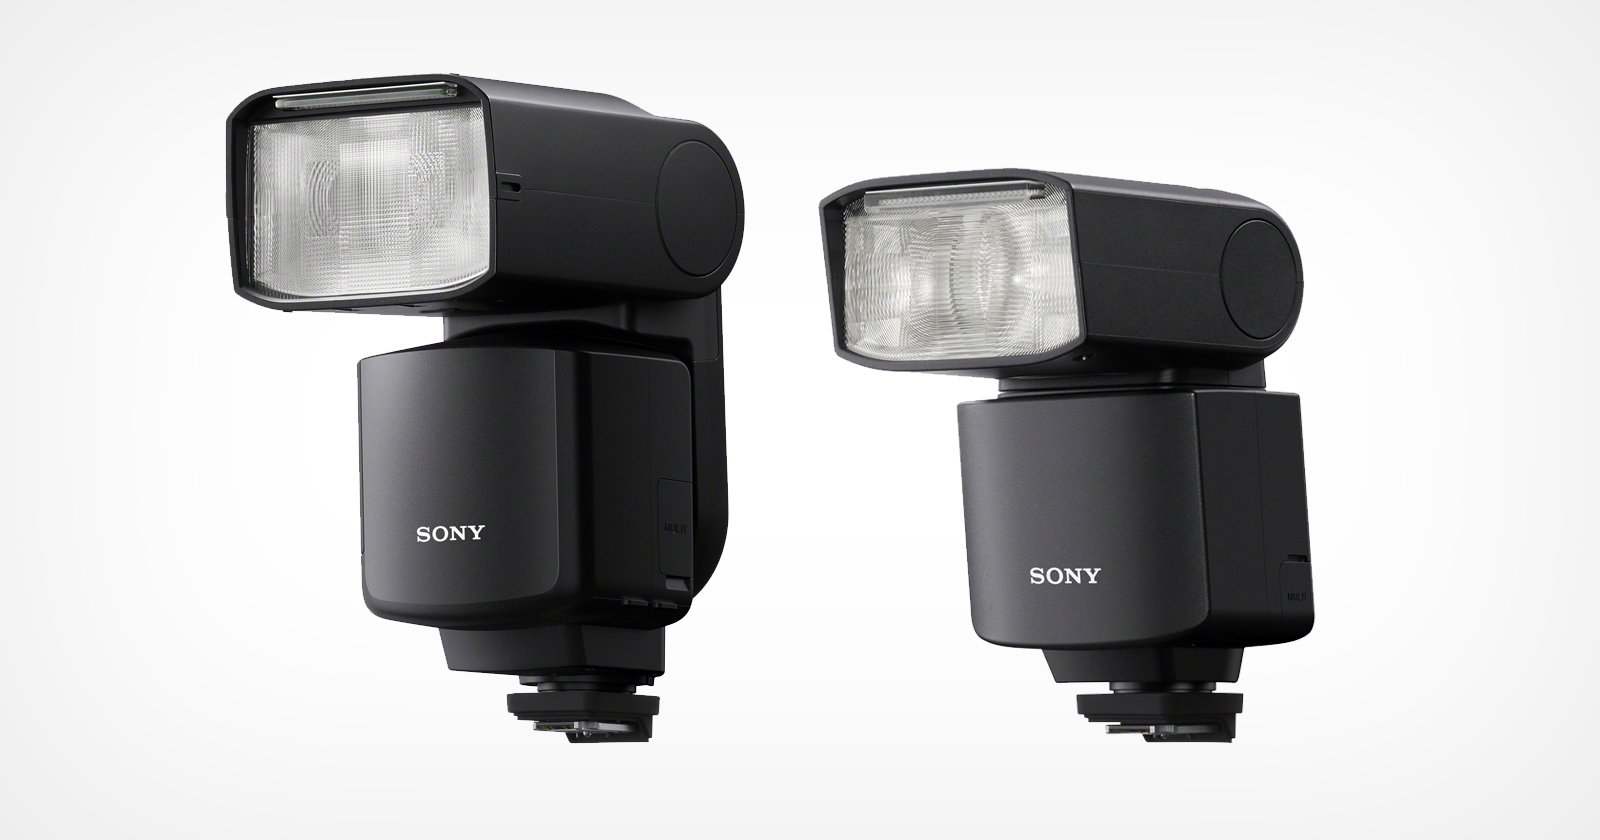 Sony Unveils Two New Flashes, the HVL-F60RM2 and HVL-F46RM | PetaPixel